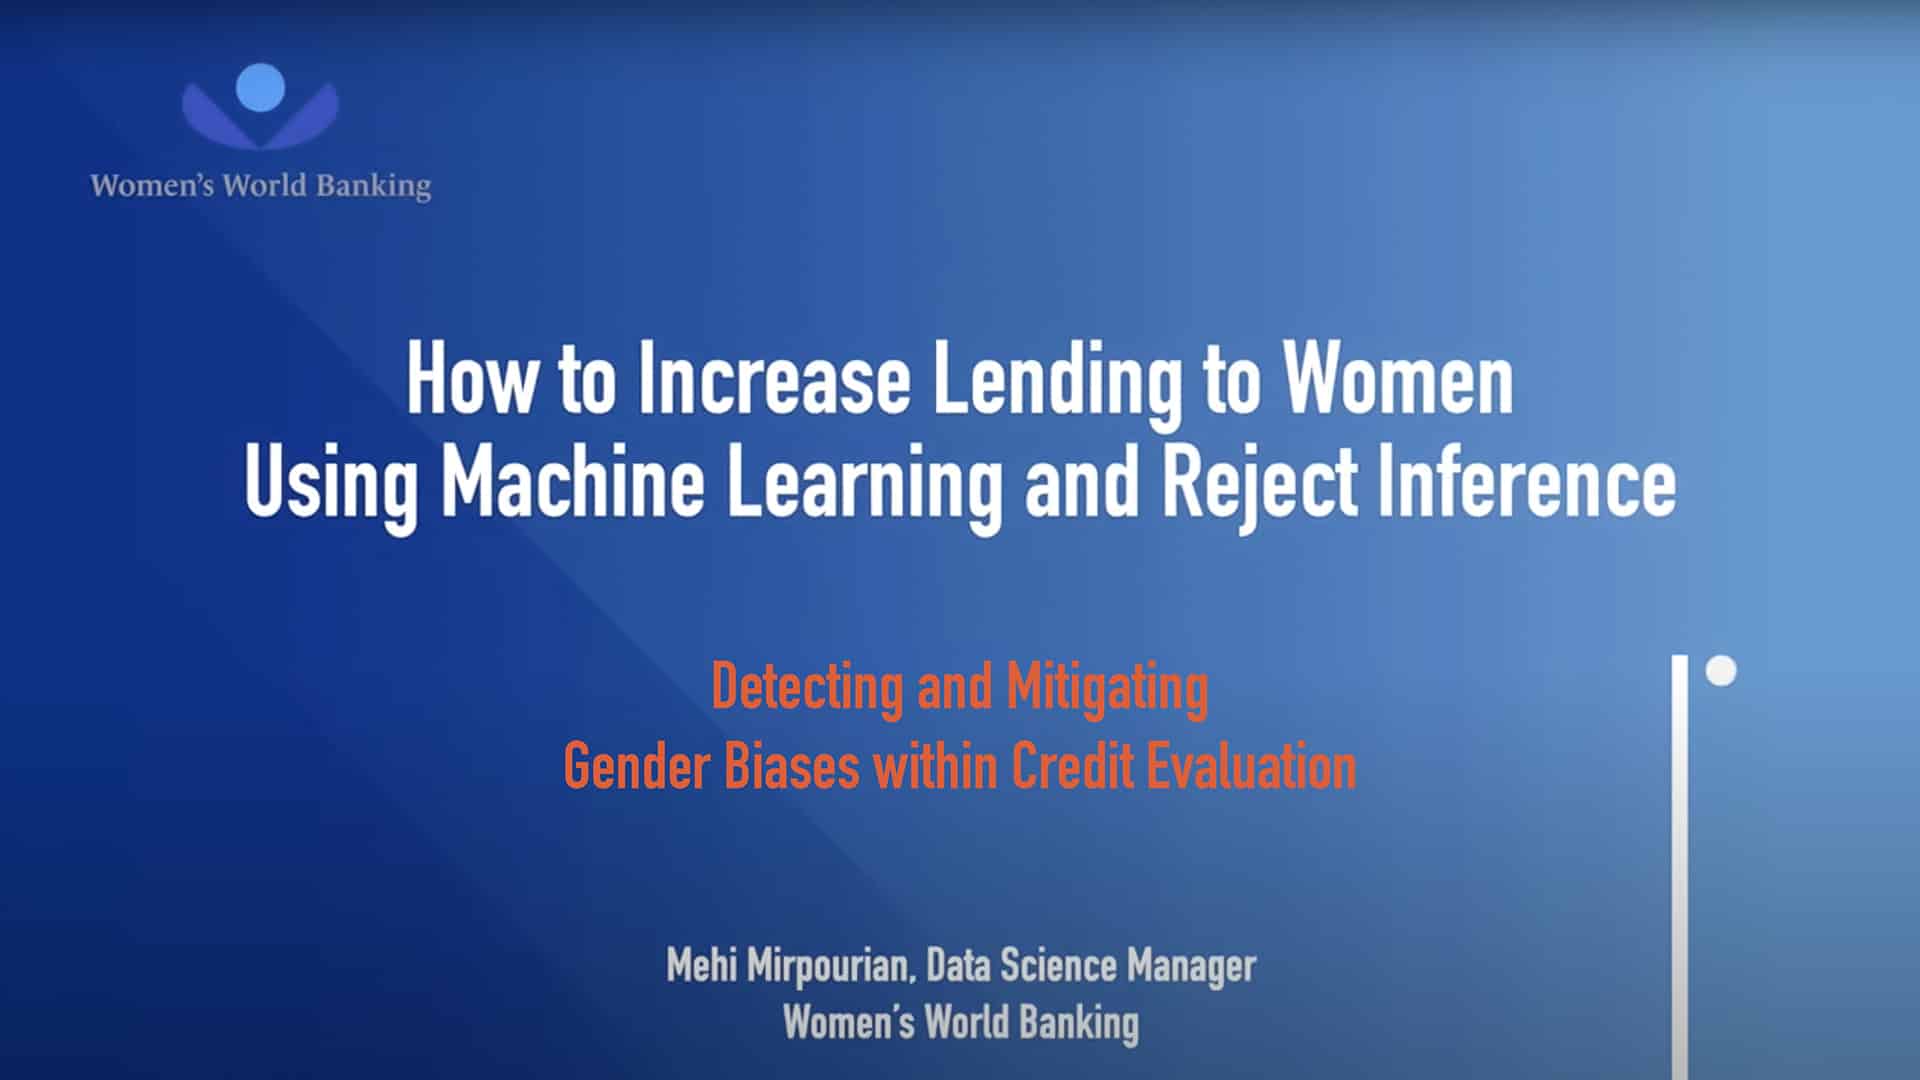 wwb courses Detecting and Mitigating Gender Biases within Credit Evaluation Processes